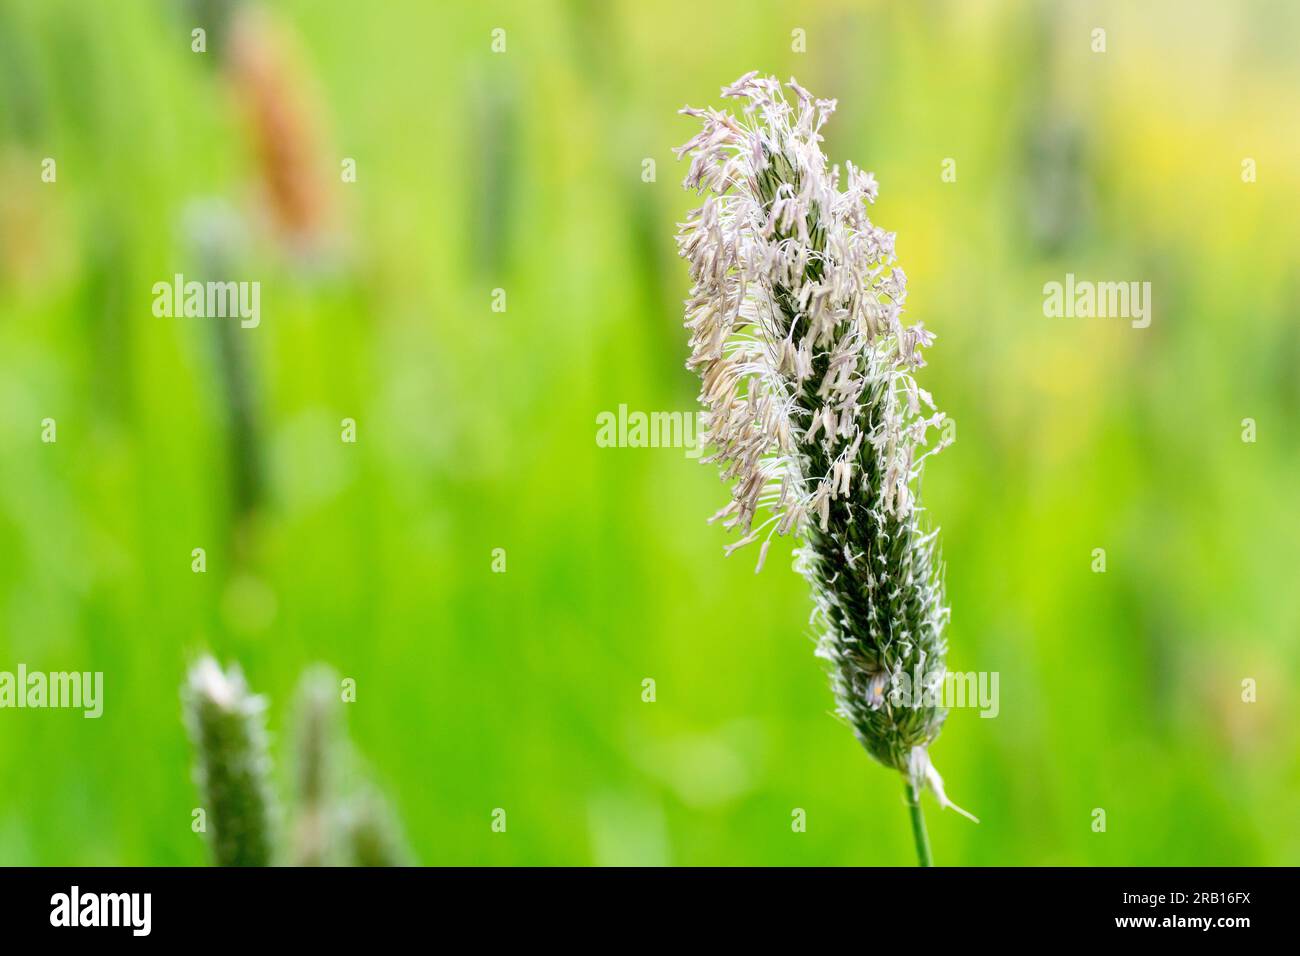 Meadow Foxtail (alopecurus pratensis), close up showing a single flowerhead of the common grass in flower in the spring, isolated. Stock Photo